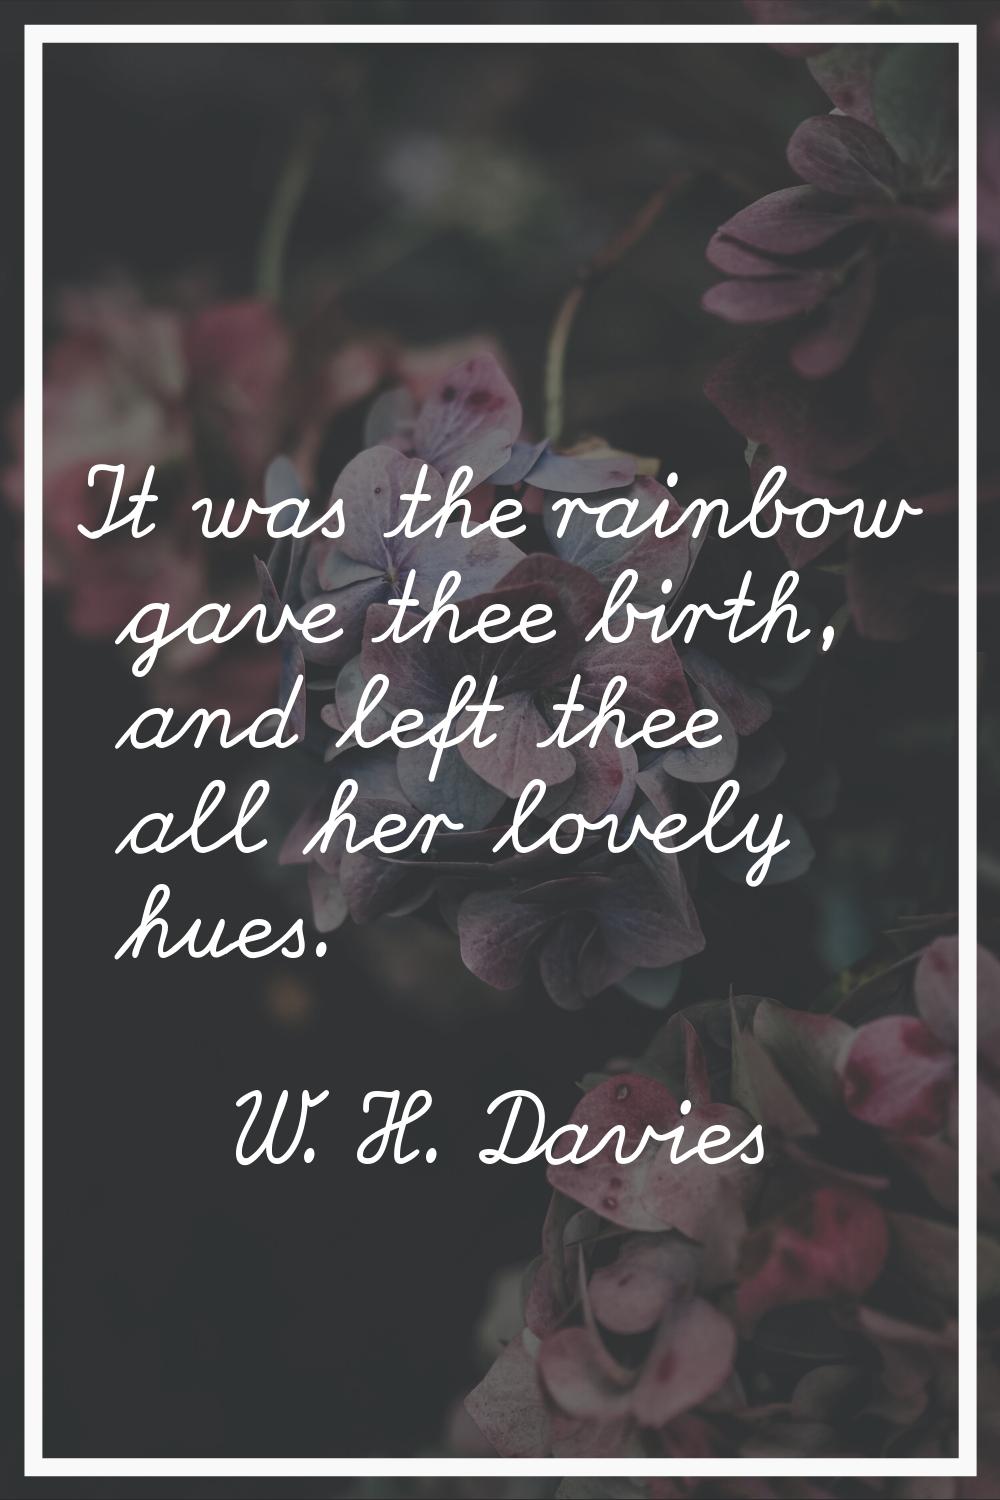 It was the rainbow gave thee birth, and left thee all her lovely hues.